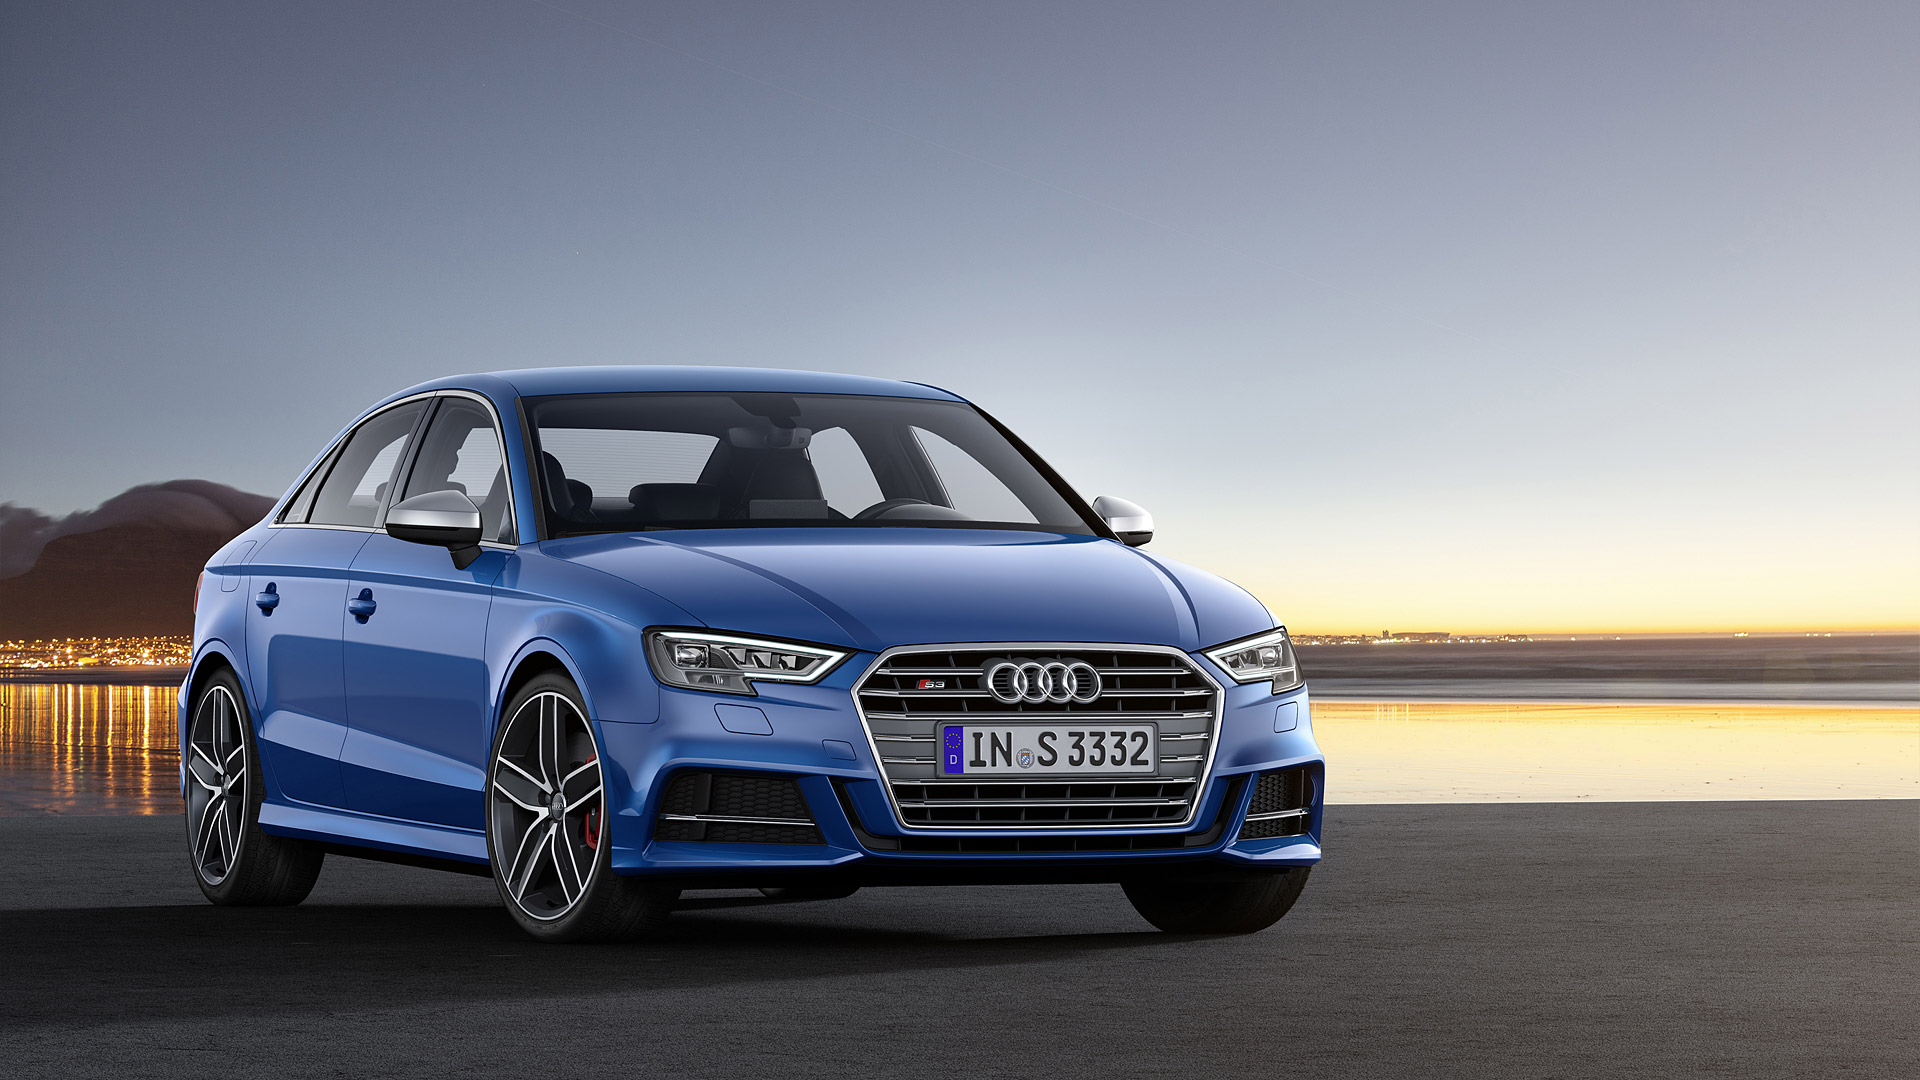 2017 Audi S3 Wallpapers HD Images   WSupercars 1920x1080